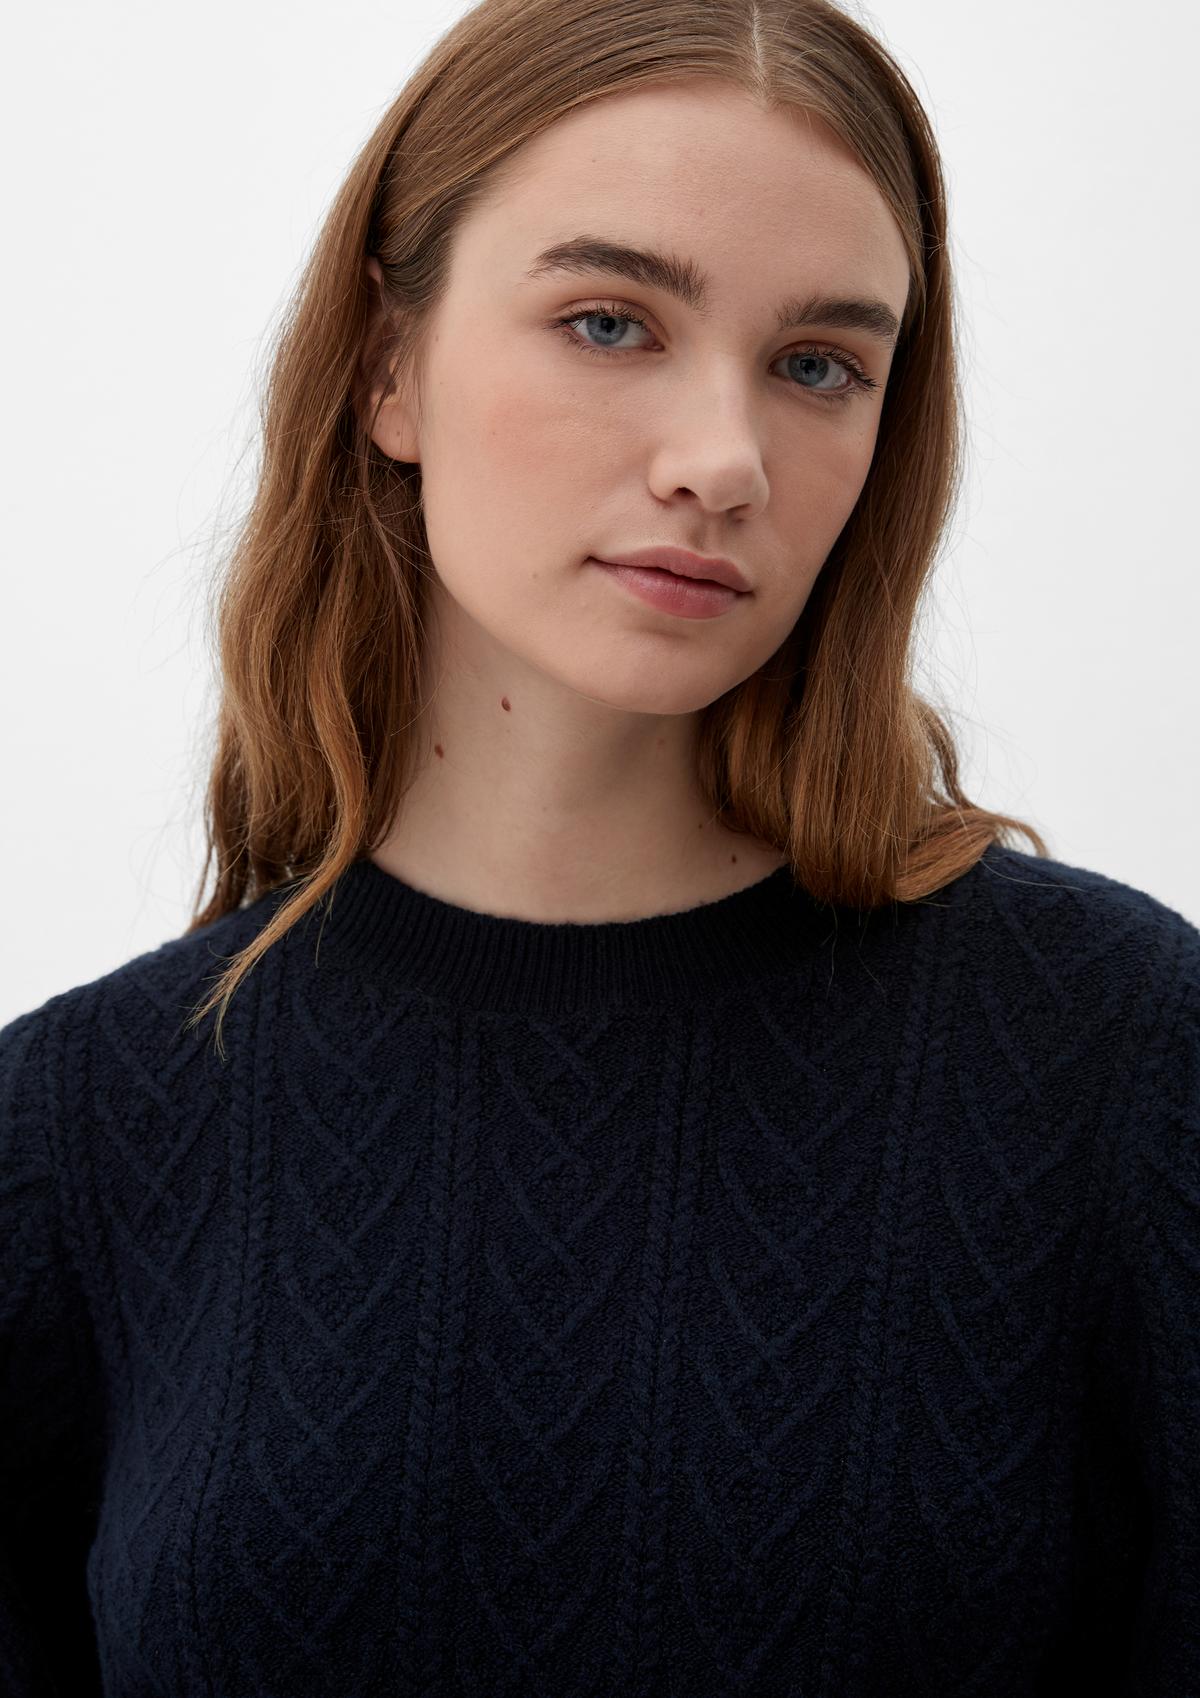 s.Oliver Knitted jumper with a cable pattern